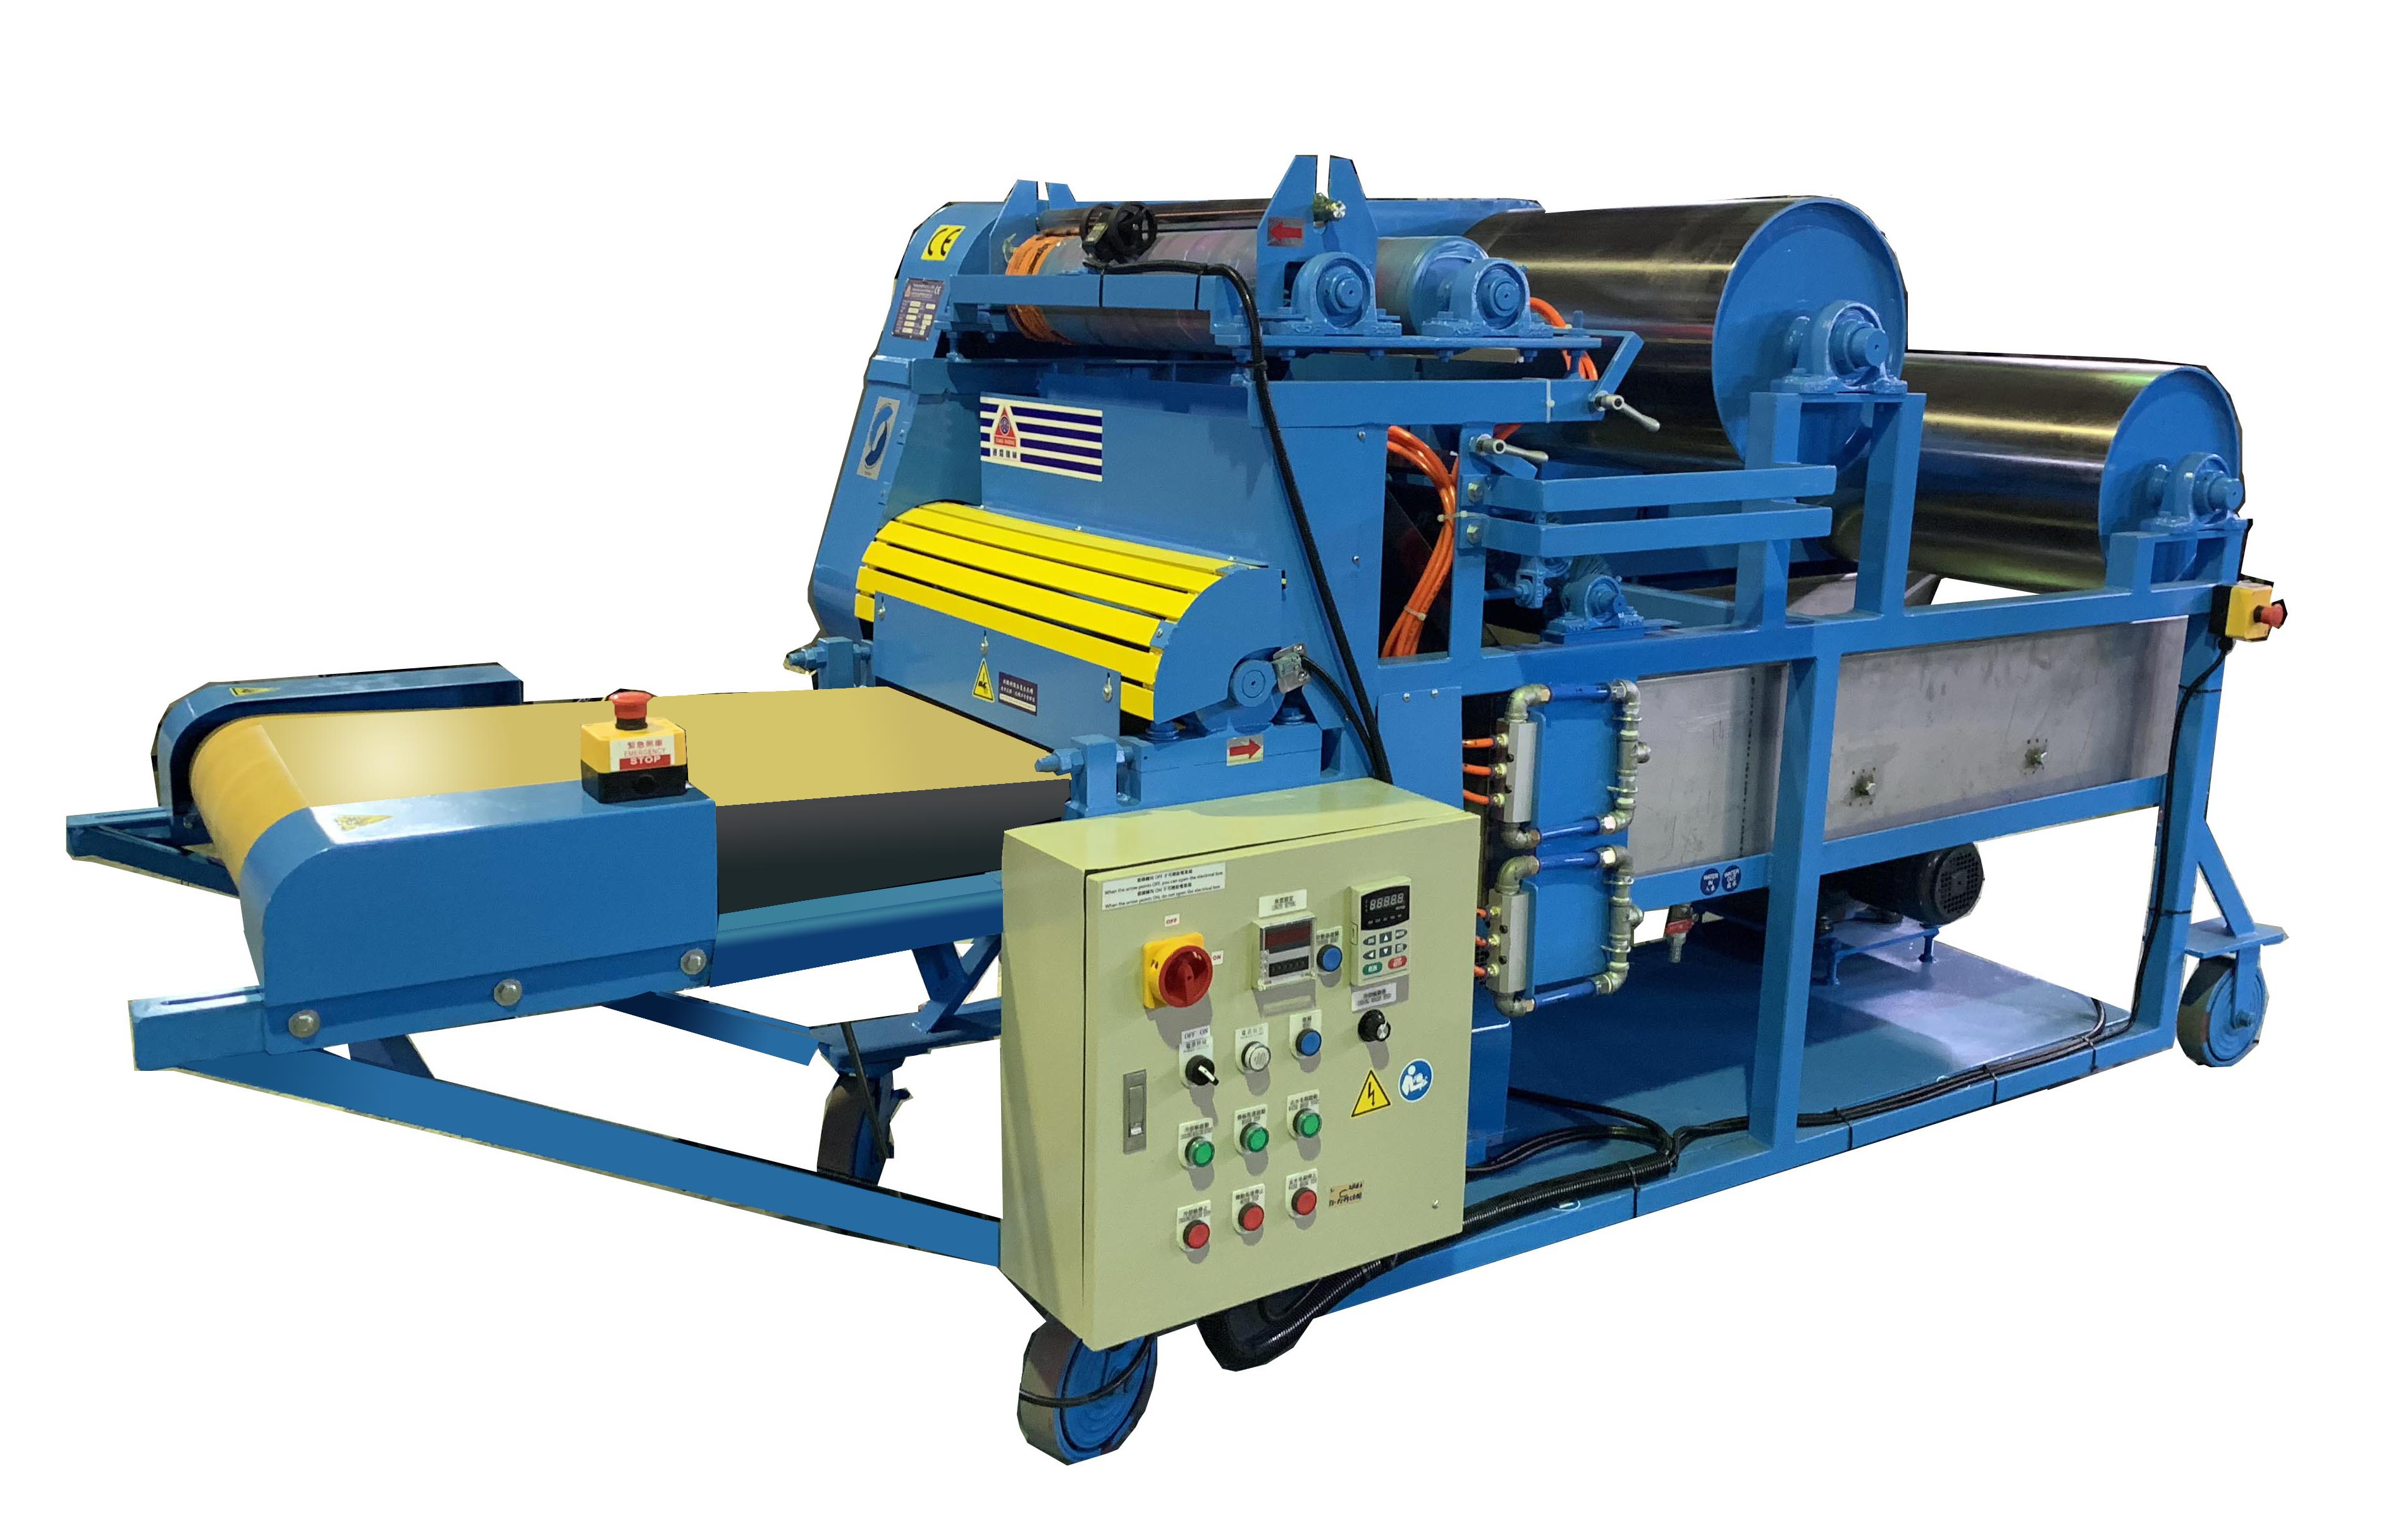 Automatic Cutting Machine (With 2 Cooling Rollers, 1 Cooling Tank, 1 Paste Tank, Precise Cutting, and Blowing System)